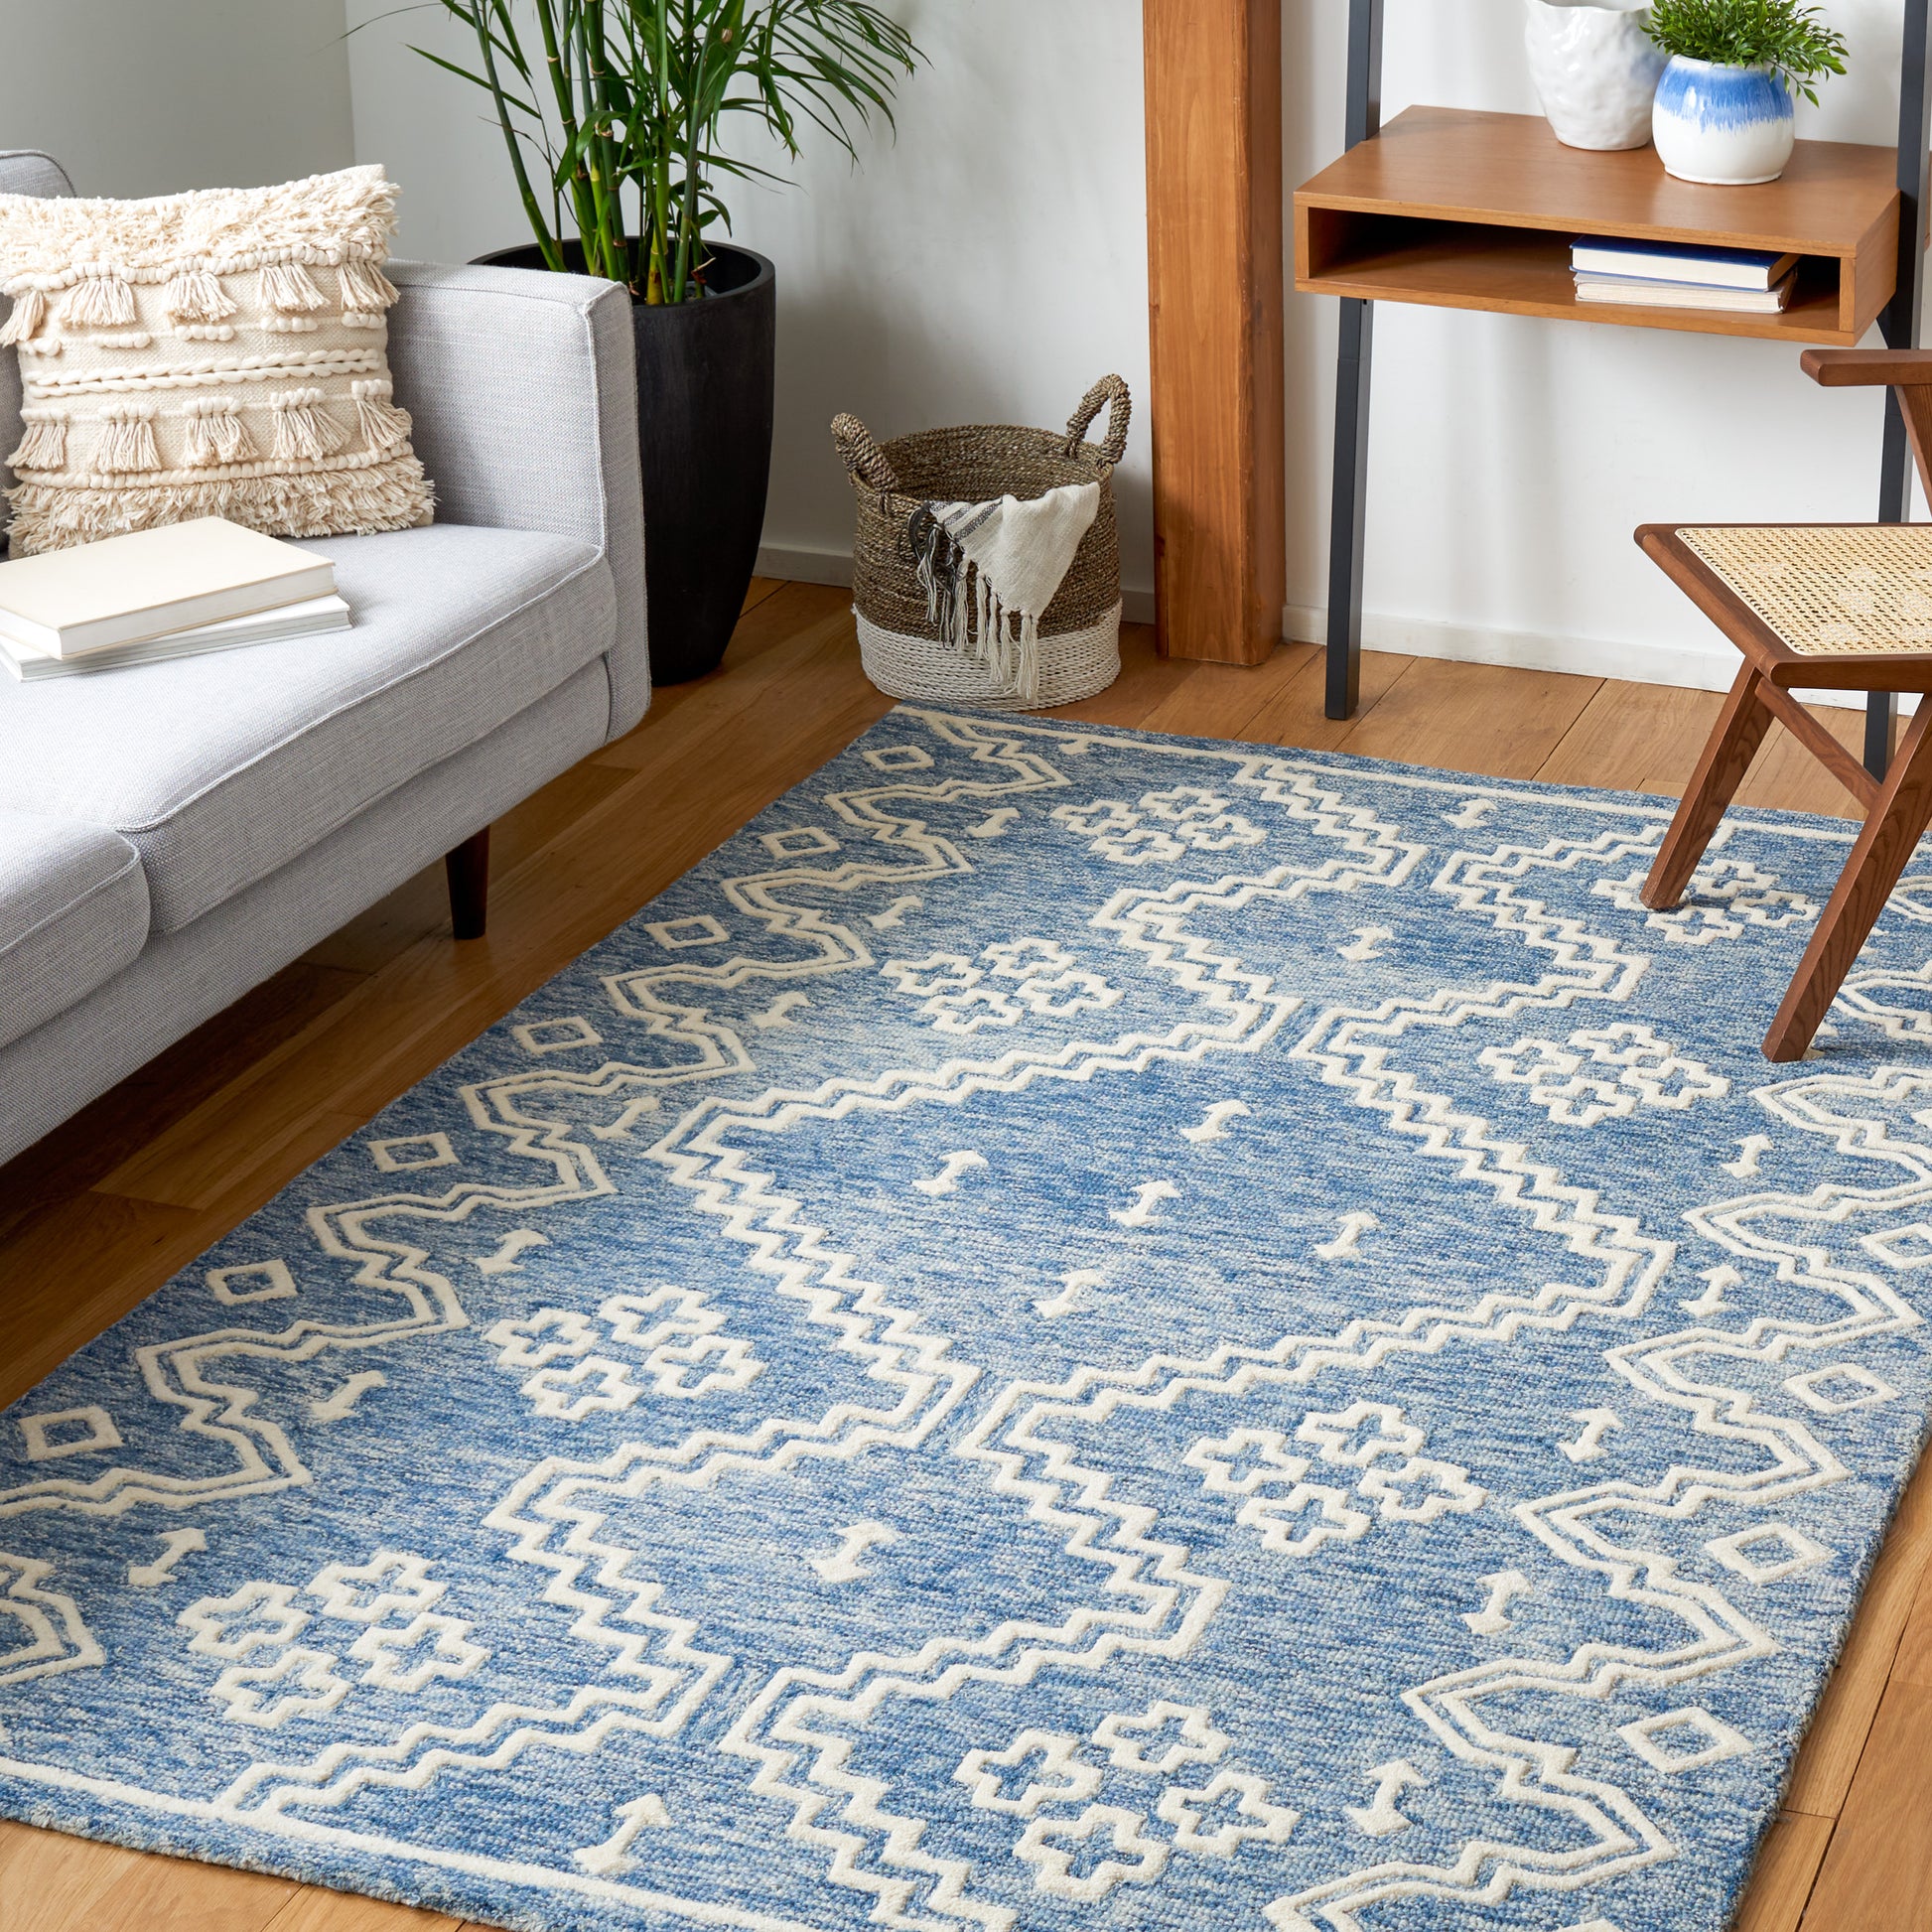 Safavieh Abstract Abt852M Blue/Ivory Area Rug